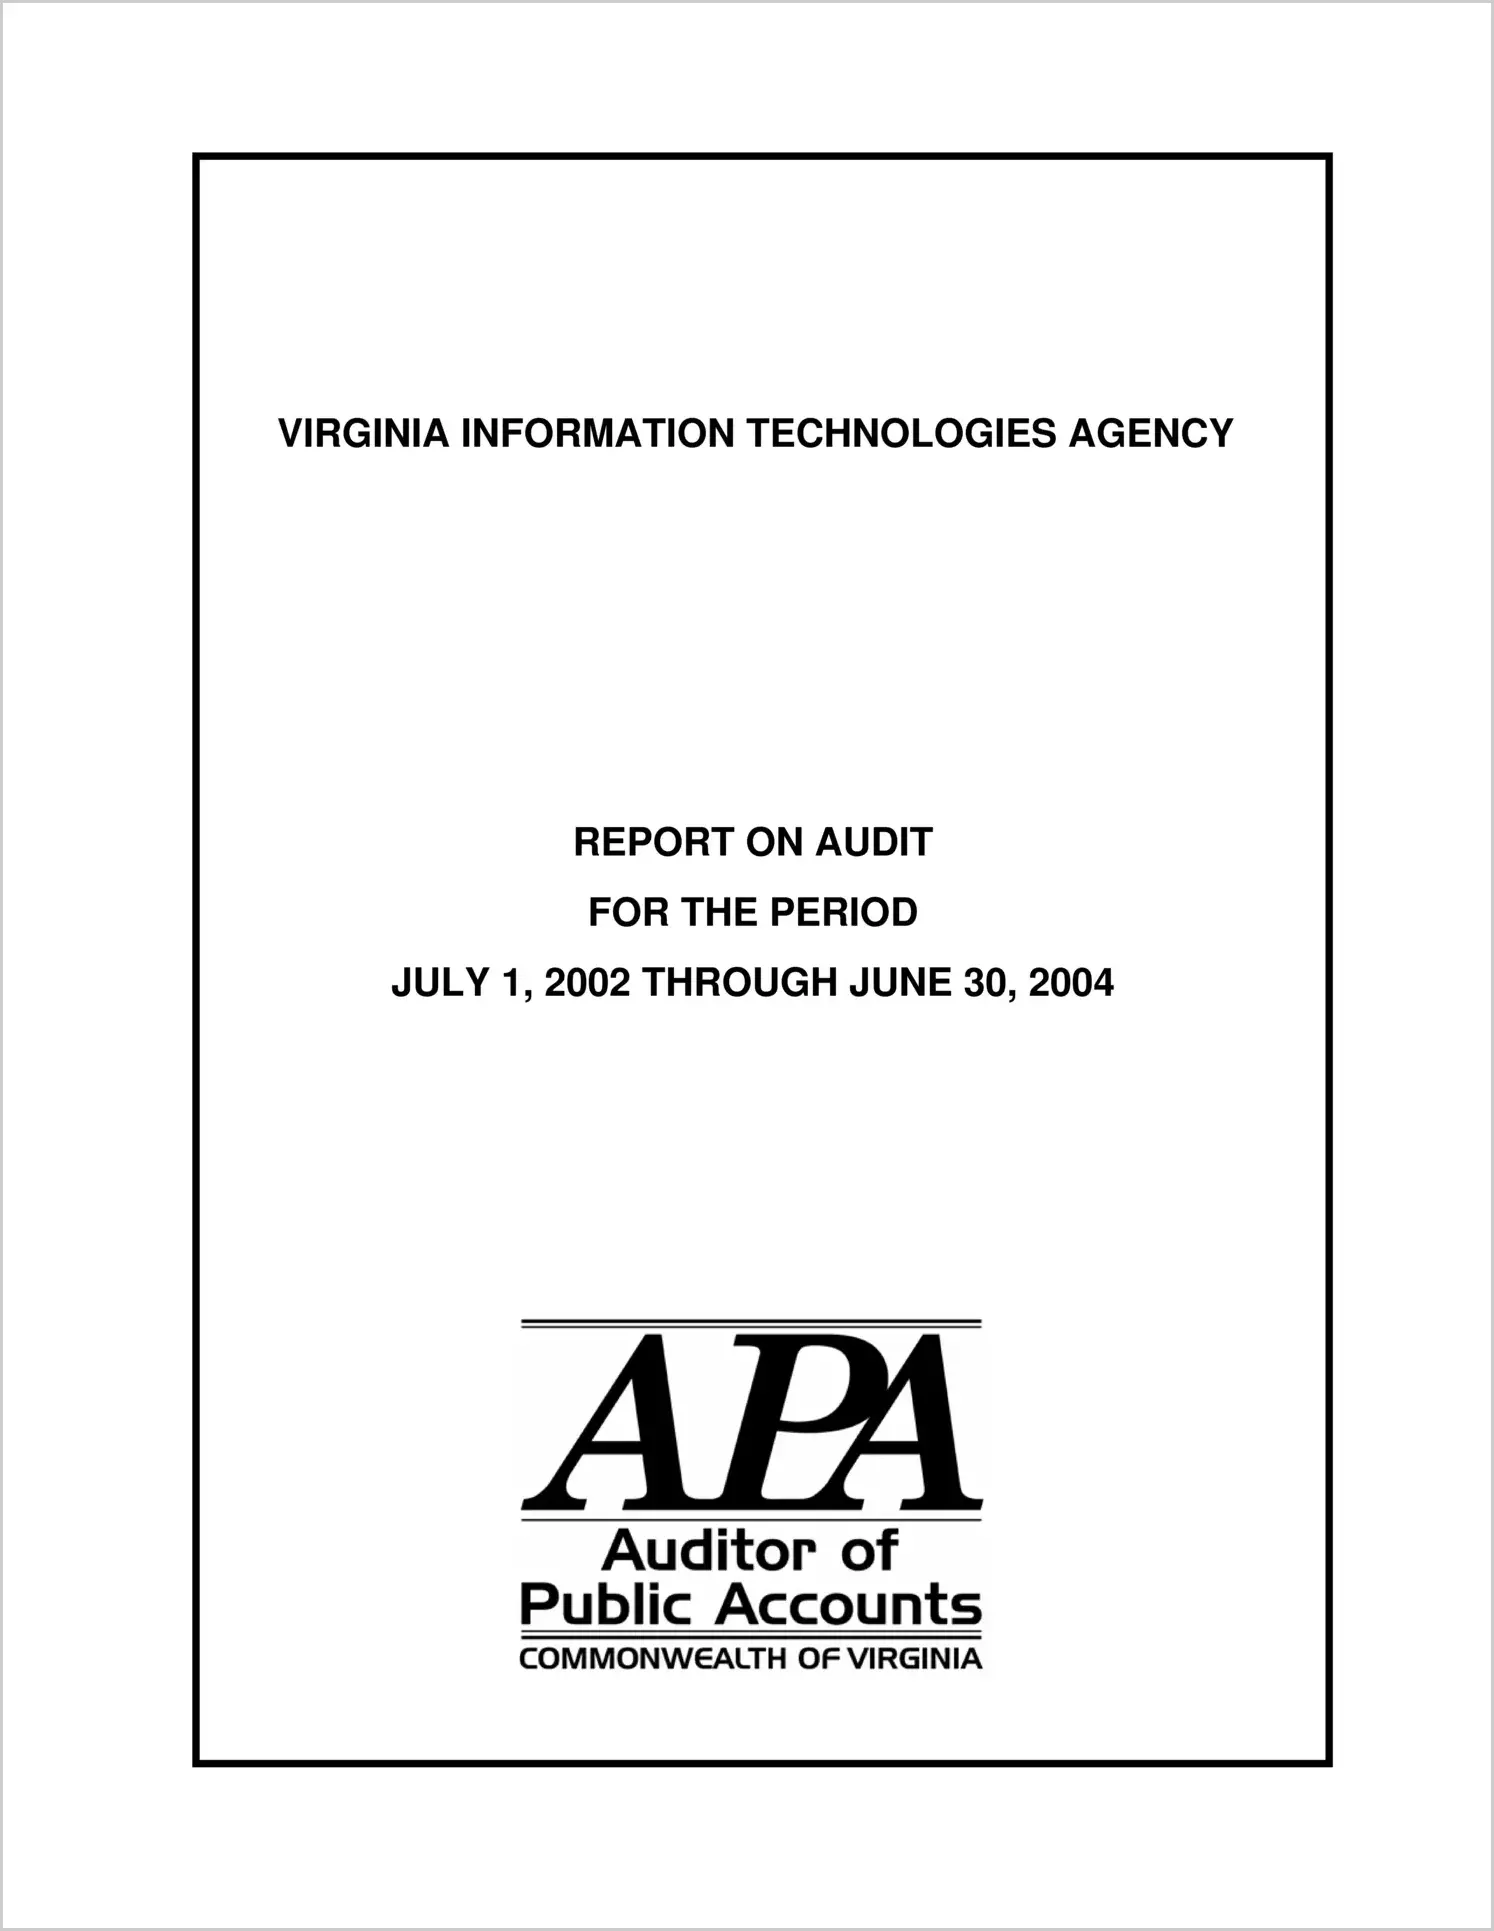 Virginia Information Technologies Agency for the period July 1, 2002 through June 30, 2004